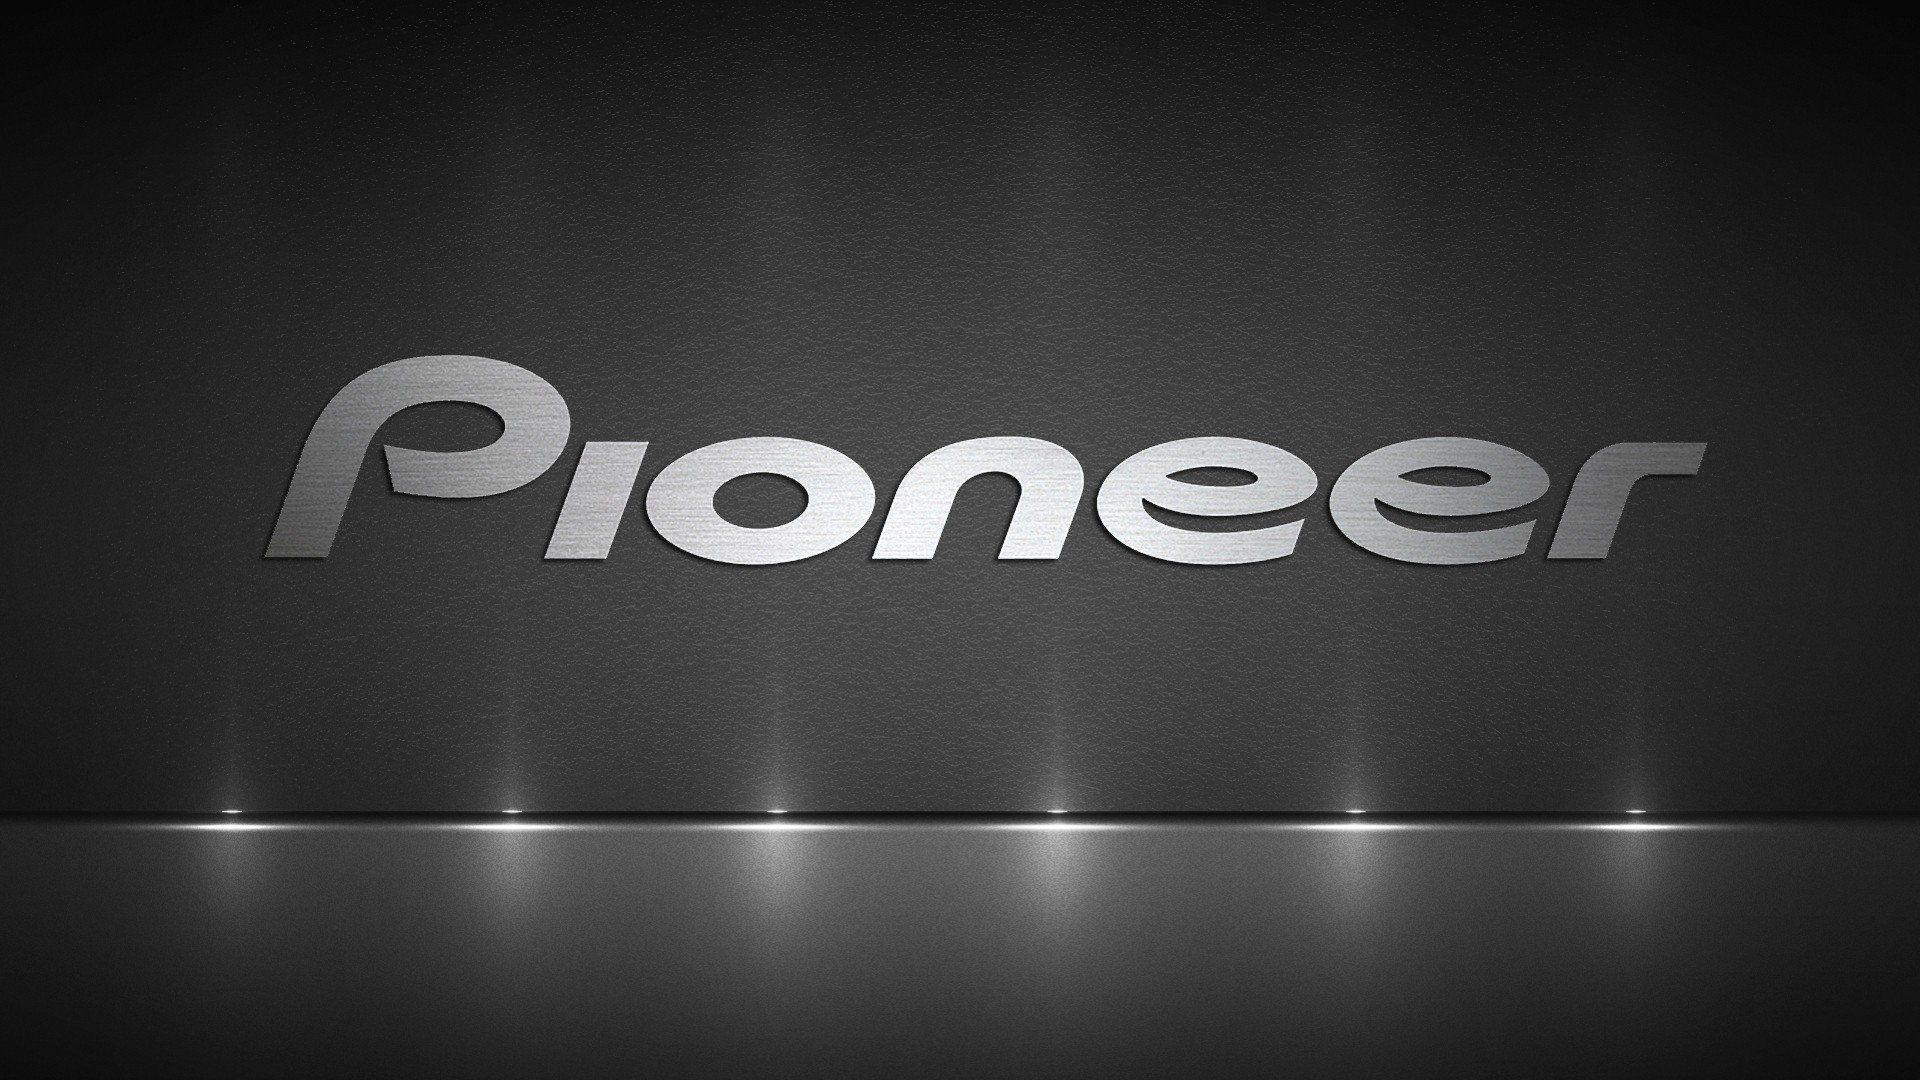 monochrome pioneer logo wallpaper and background